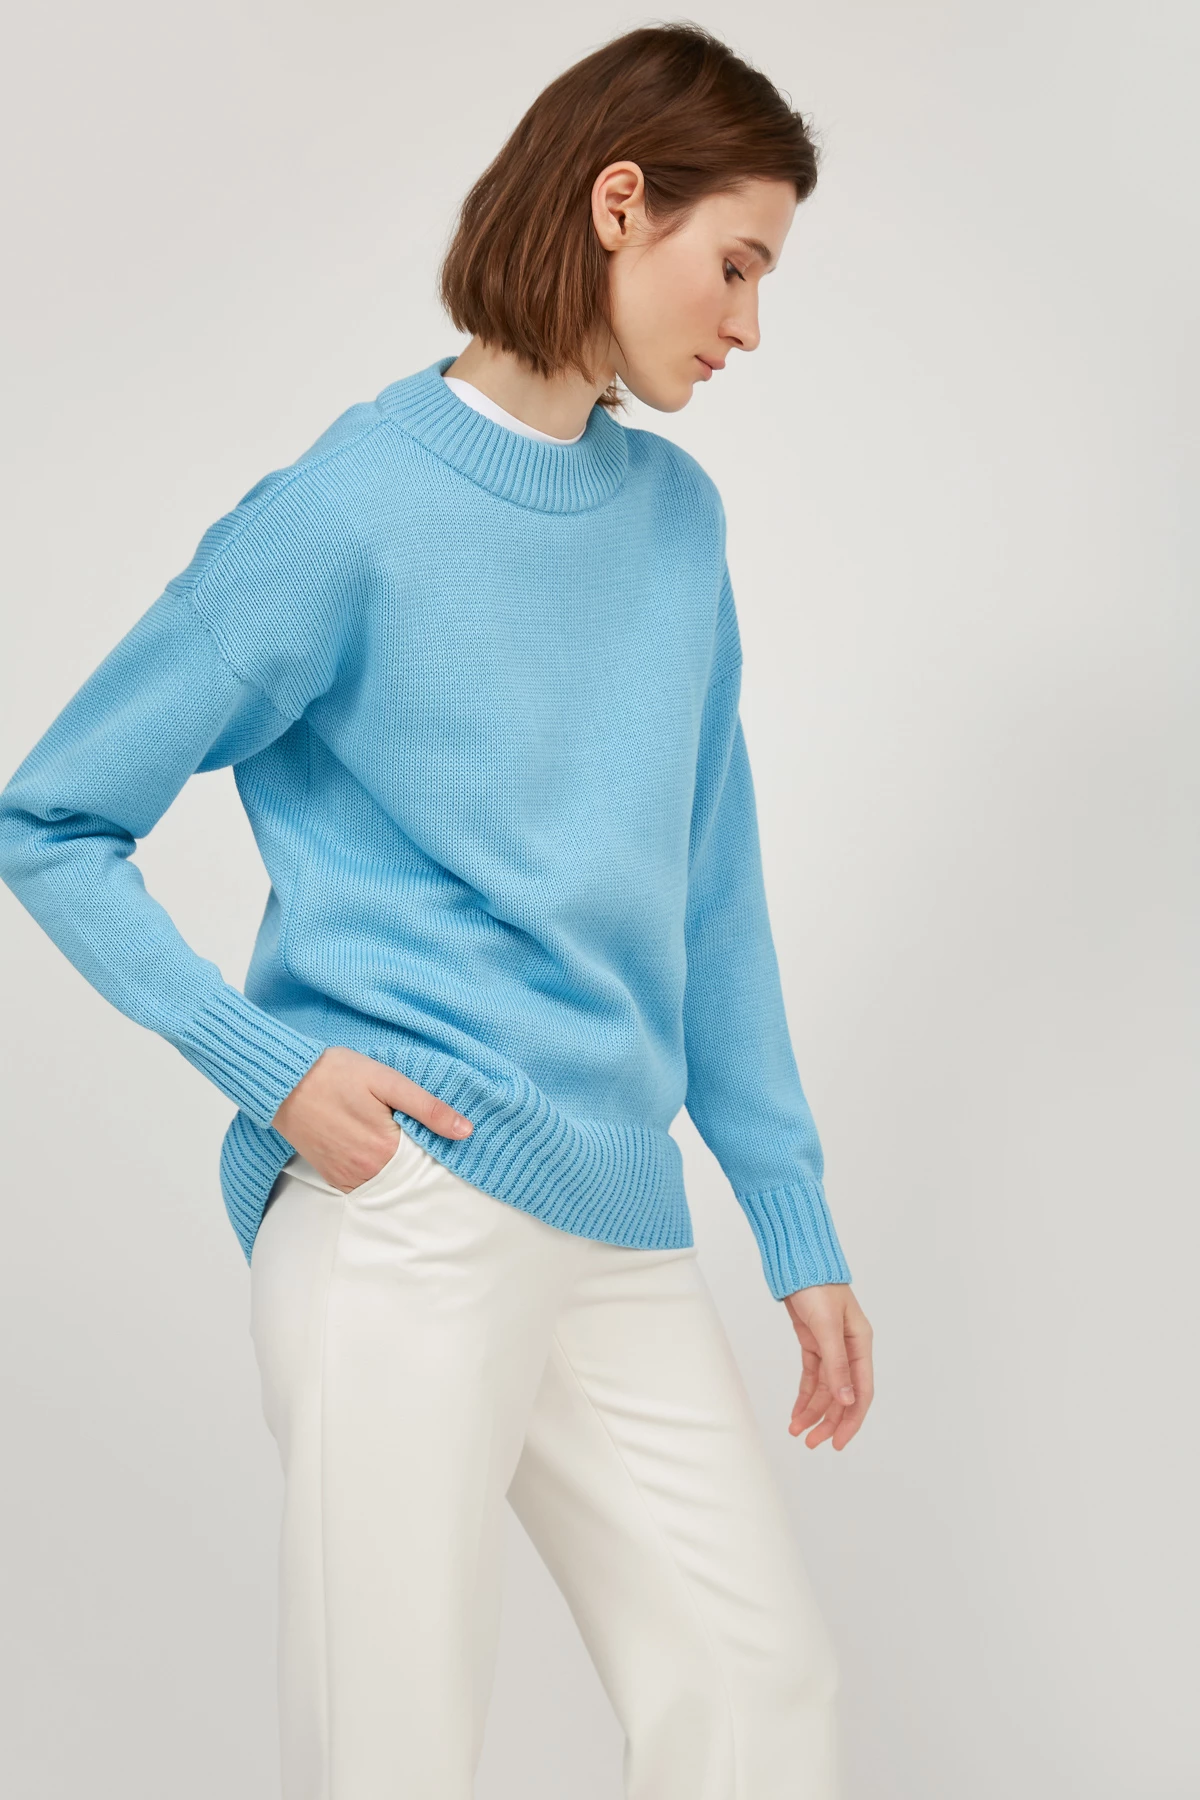 Blue knitted cotton sweater, photo 3